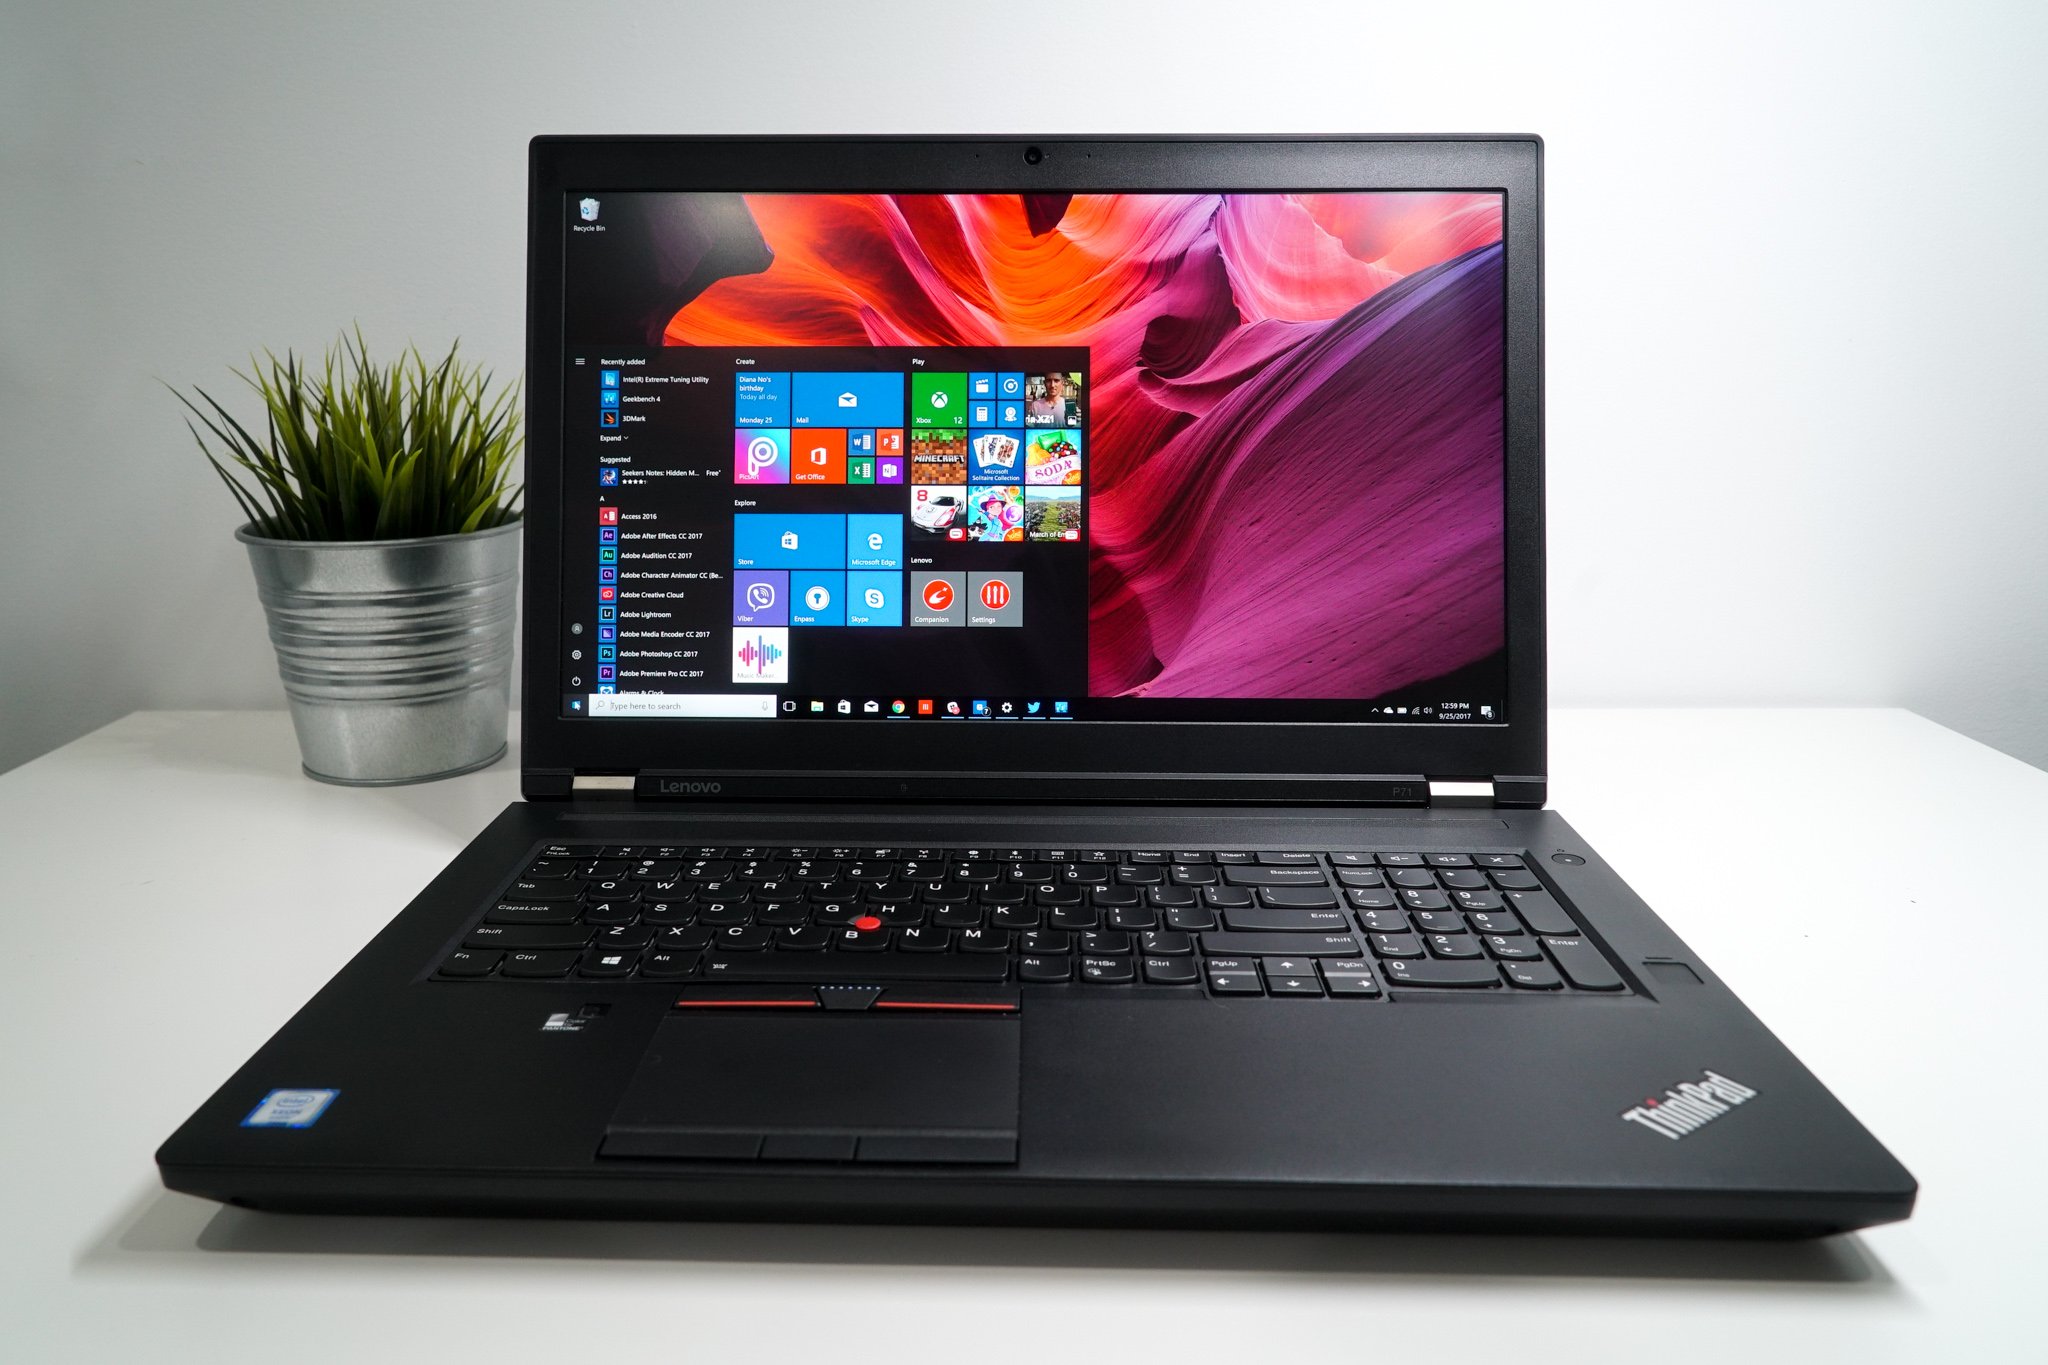 Lenovo ThinkPad P71 review: A massive laptop with specs to match 